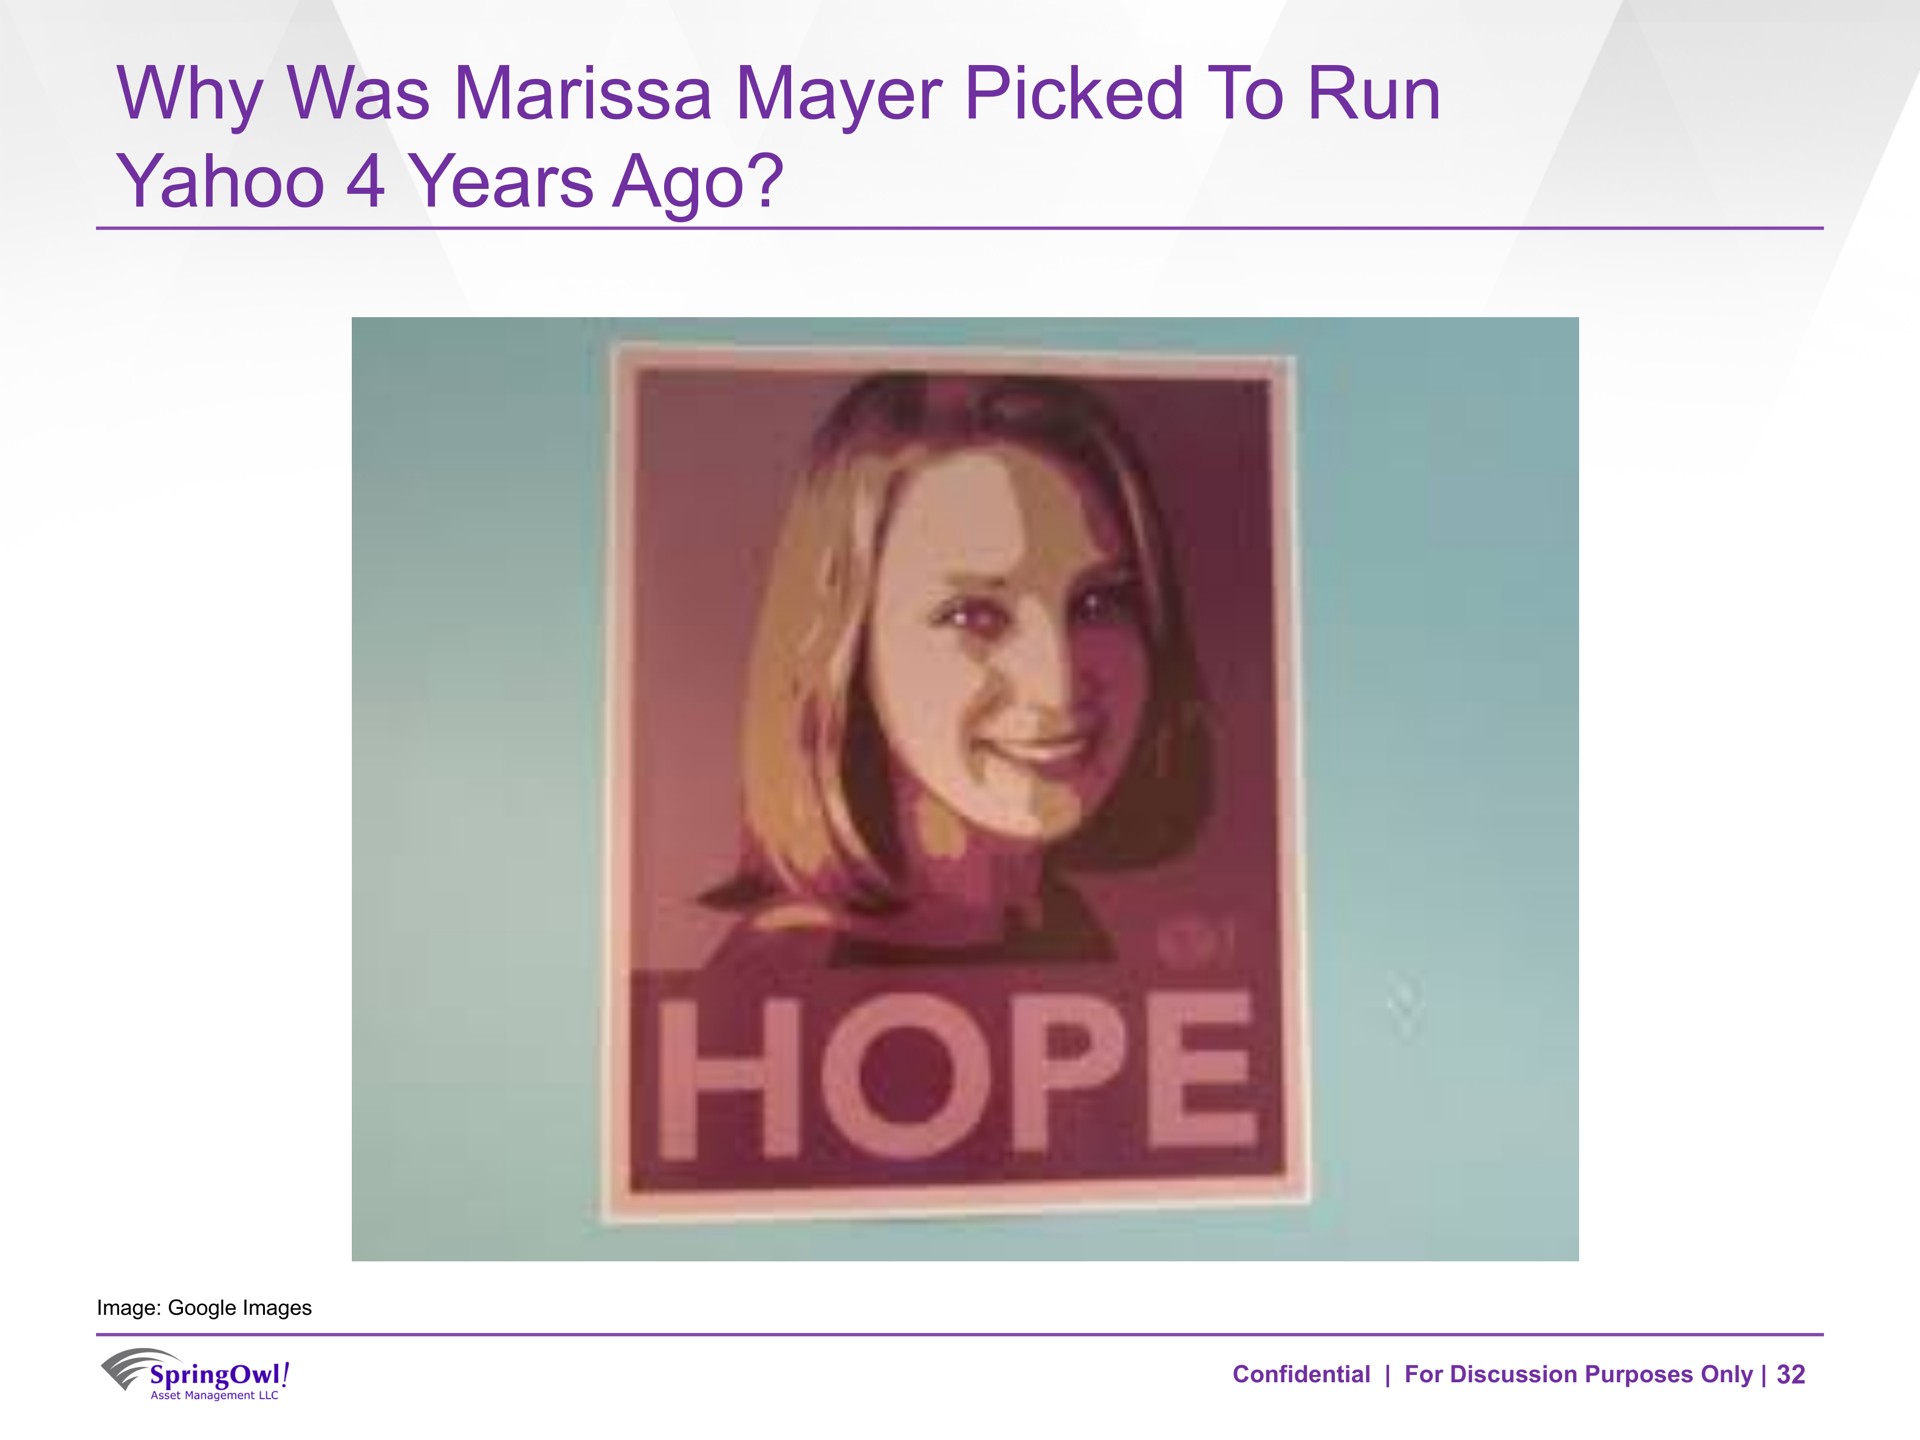 why was picked to run yahoo years ago | SpringOwl